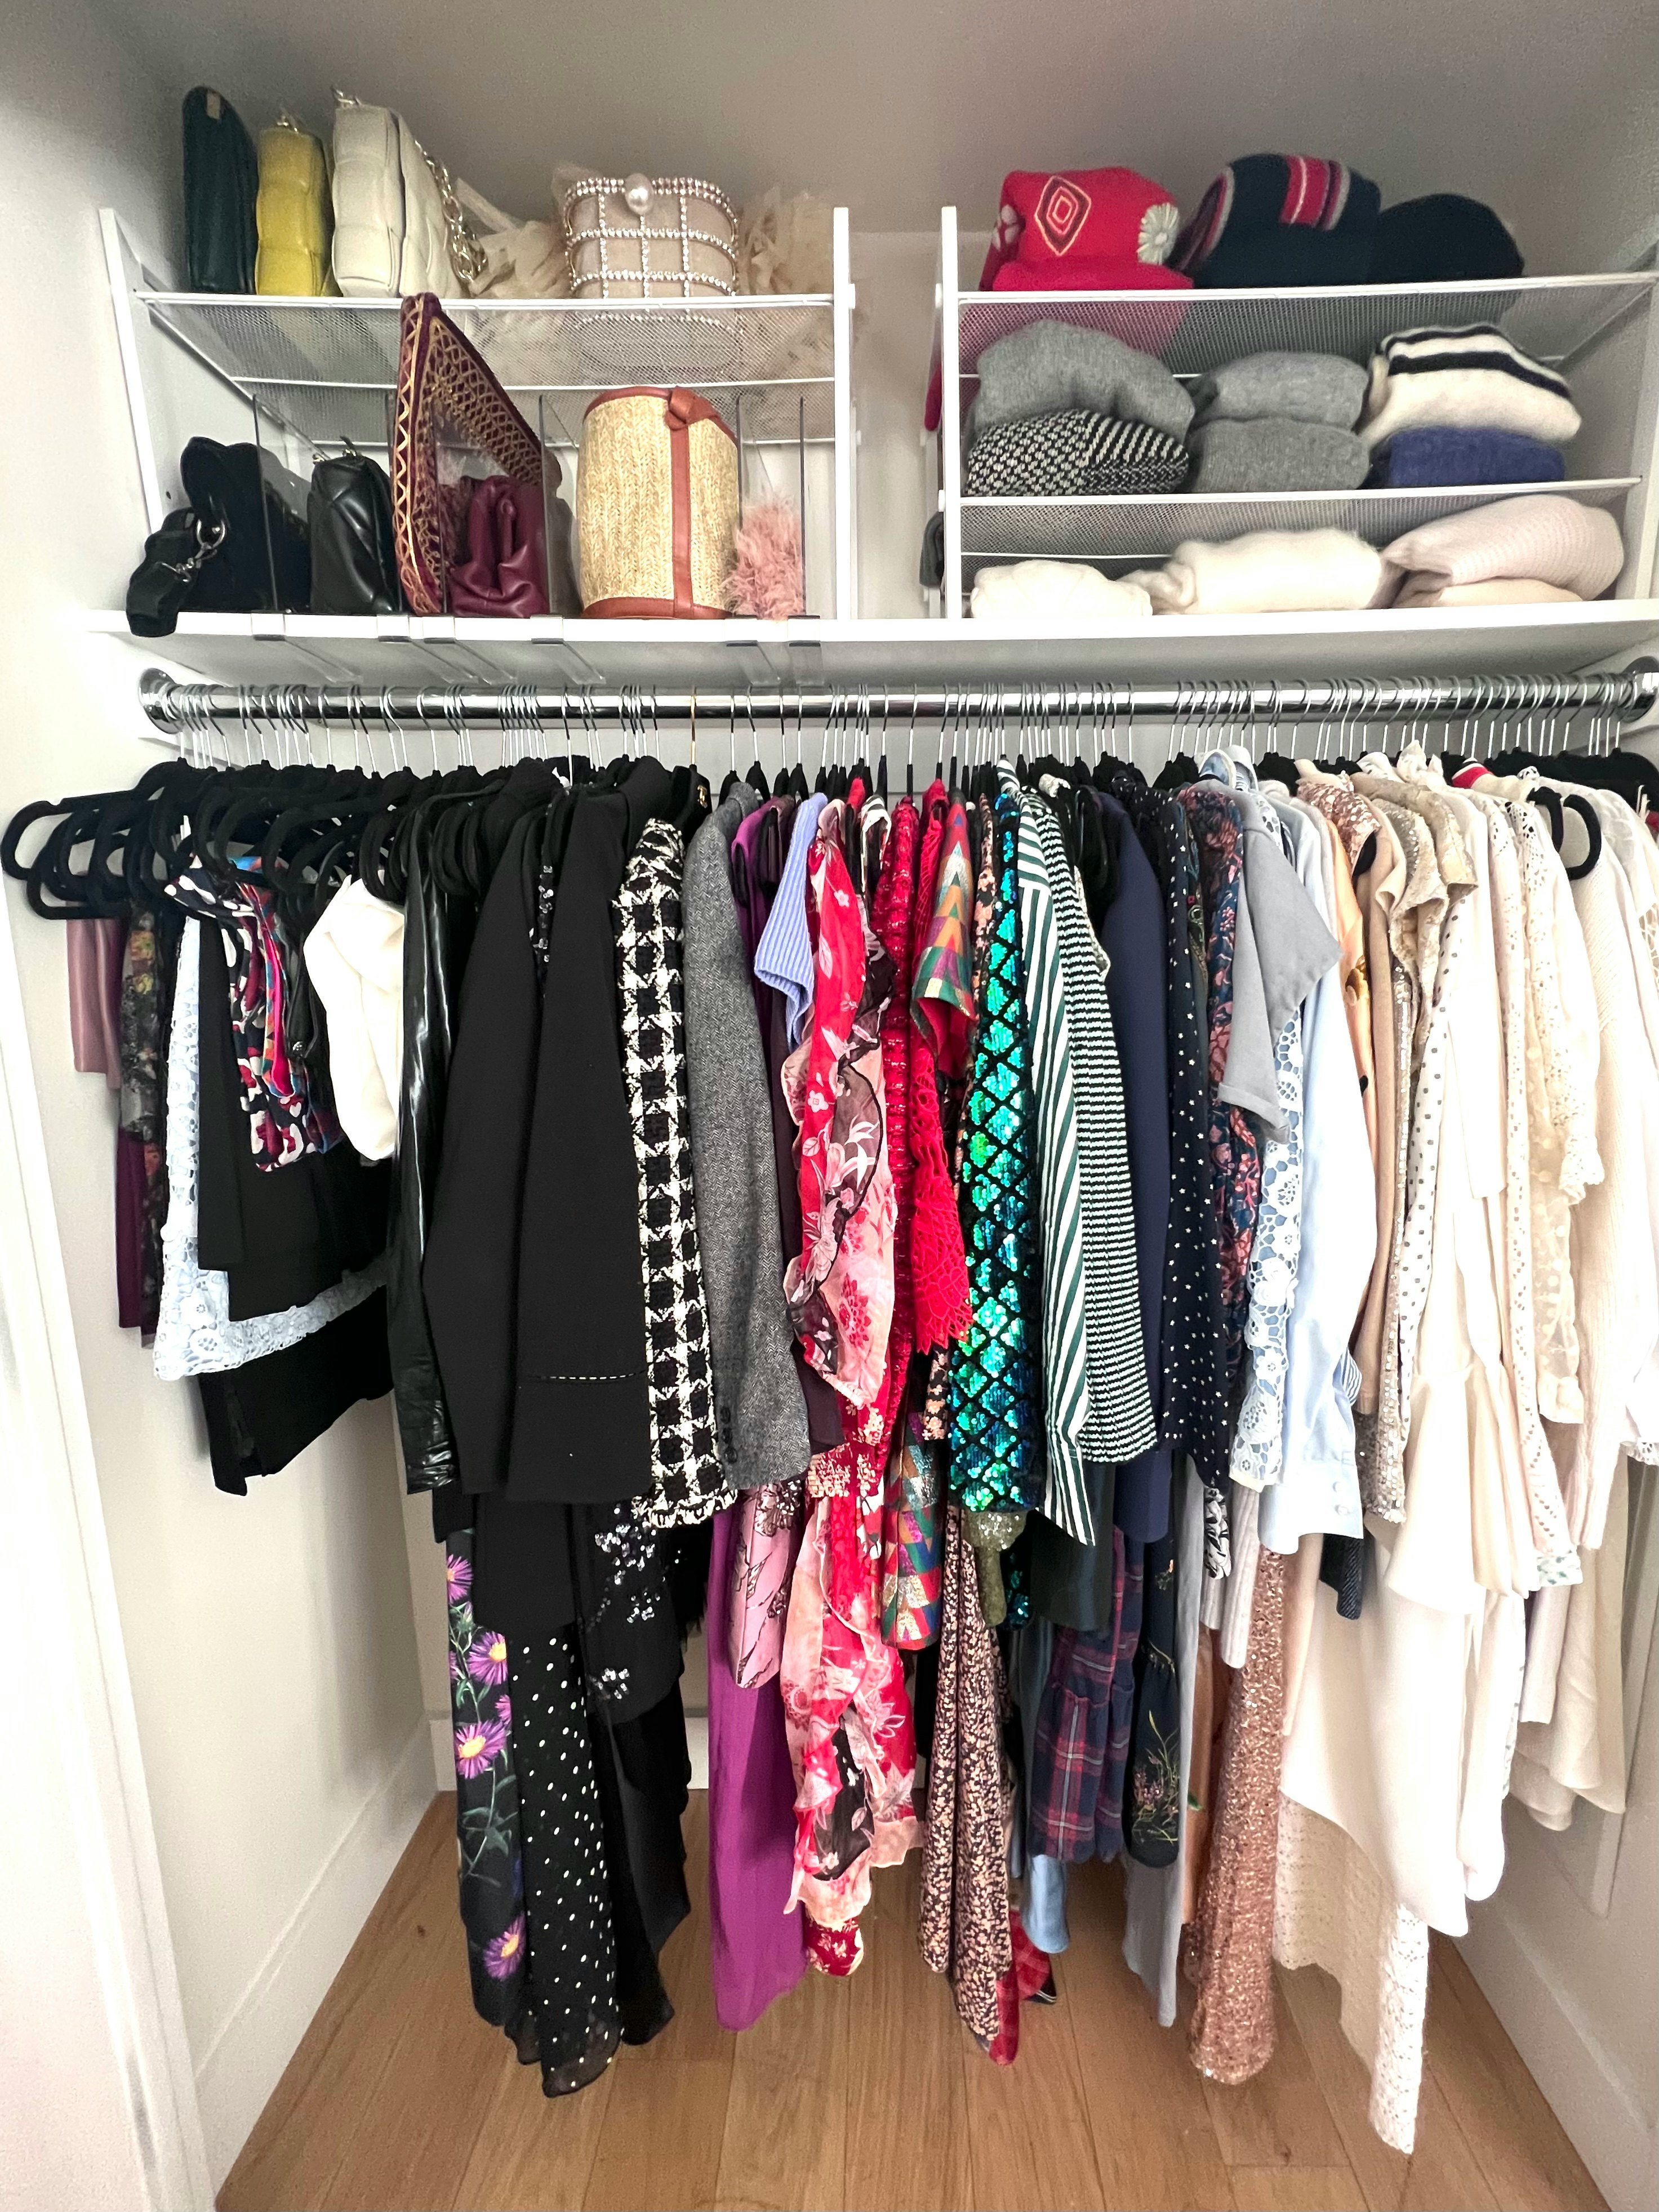 I Hired A Professional Home Organizer And Discovered A World Of